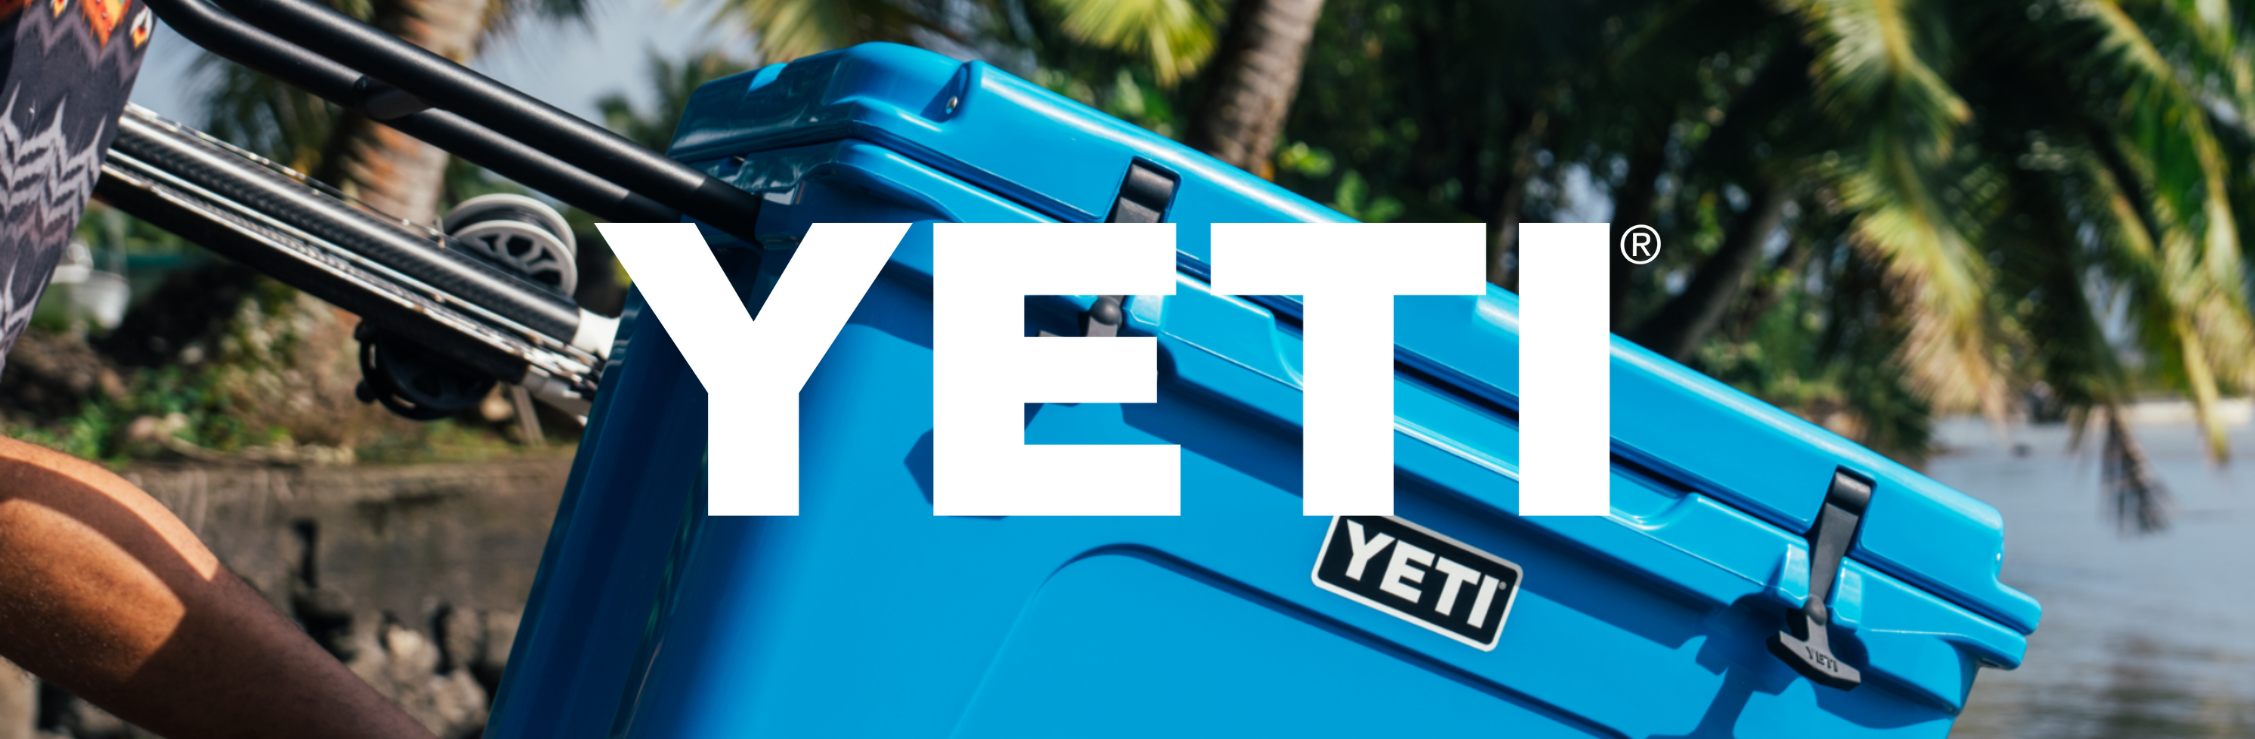 Discover YETI Drinkware, Coolers, and more.